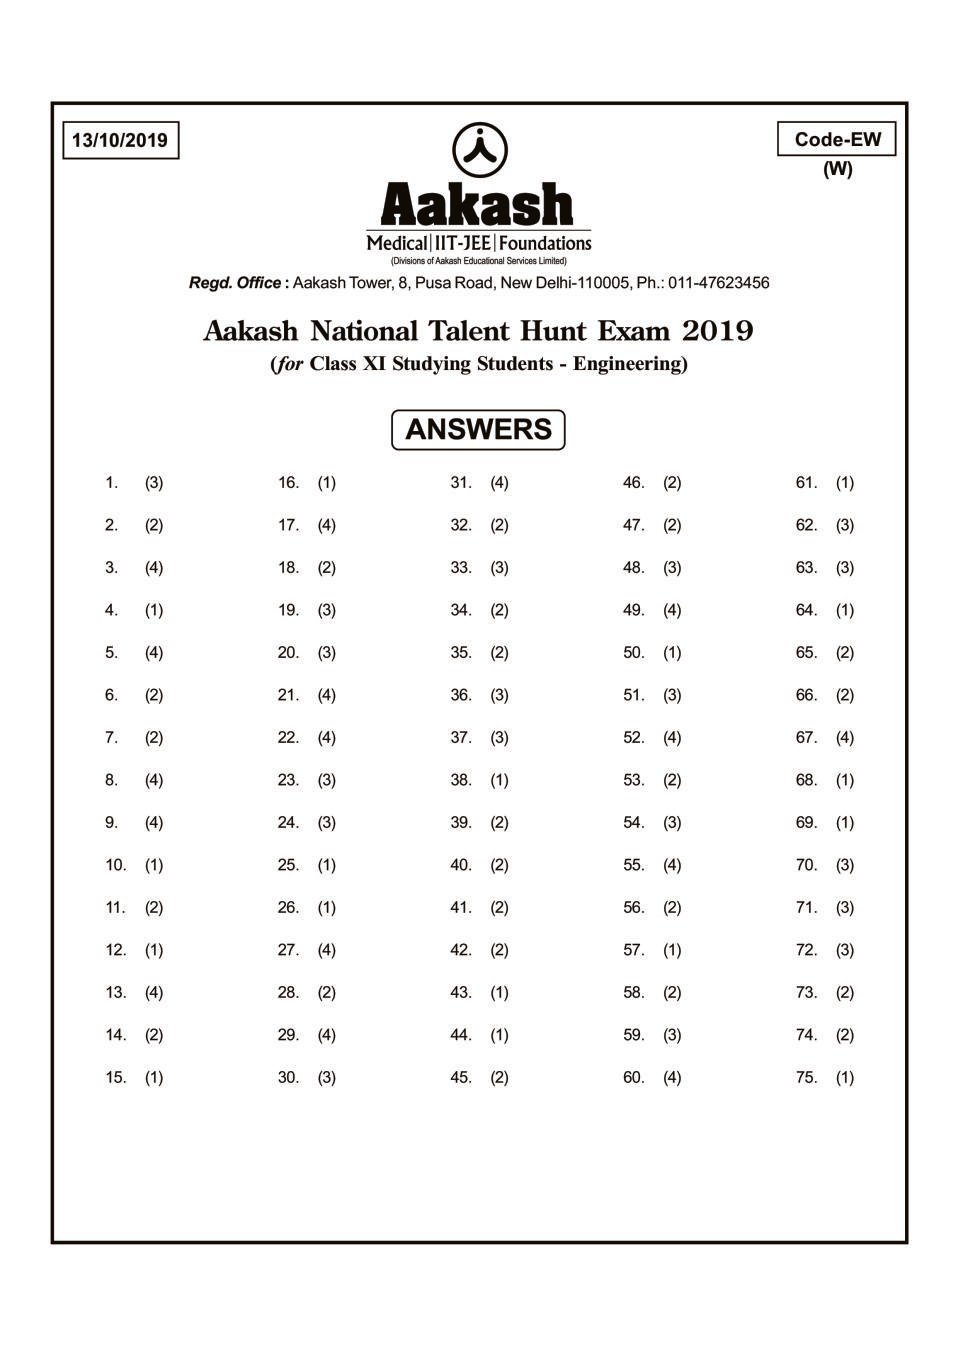 ANTHE 2019 Class 11 Answer Key (Engineering) Code EW - Page 1